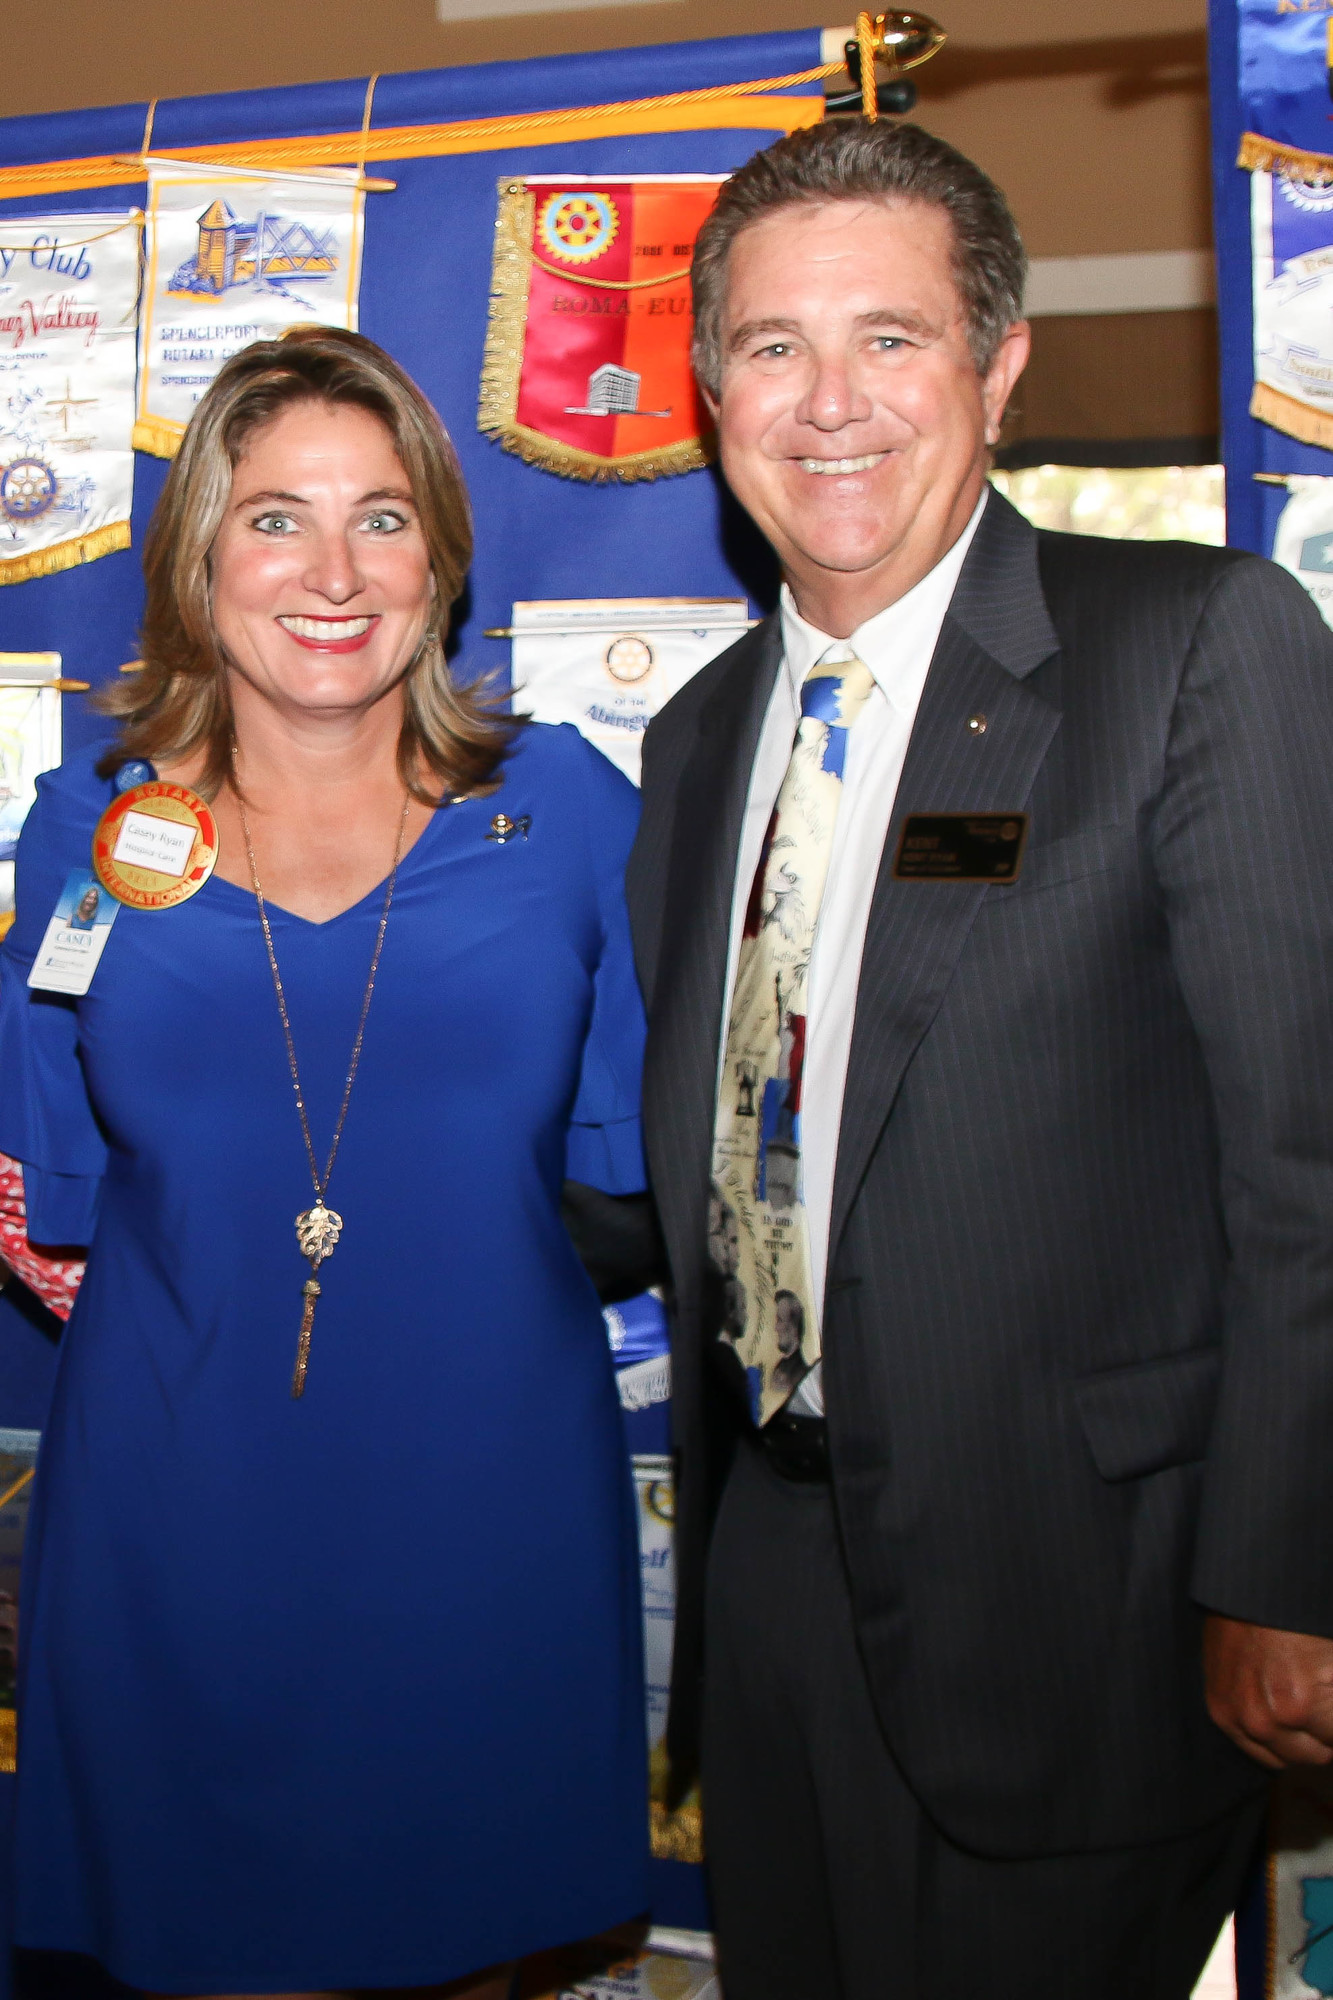 Casey Ryan poses with her father, Kent Ryan, after he inducts her into the Rotary Club of Flagler County, which he was president of from 1993 to 1994. Photo by Paige Wilson